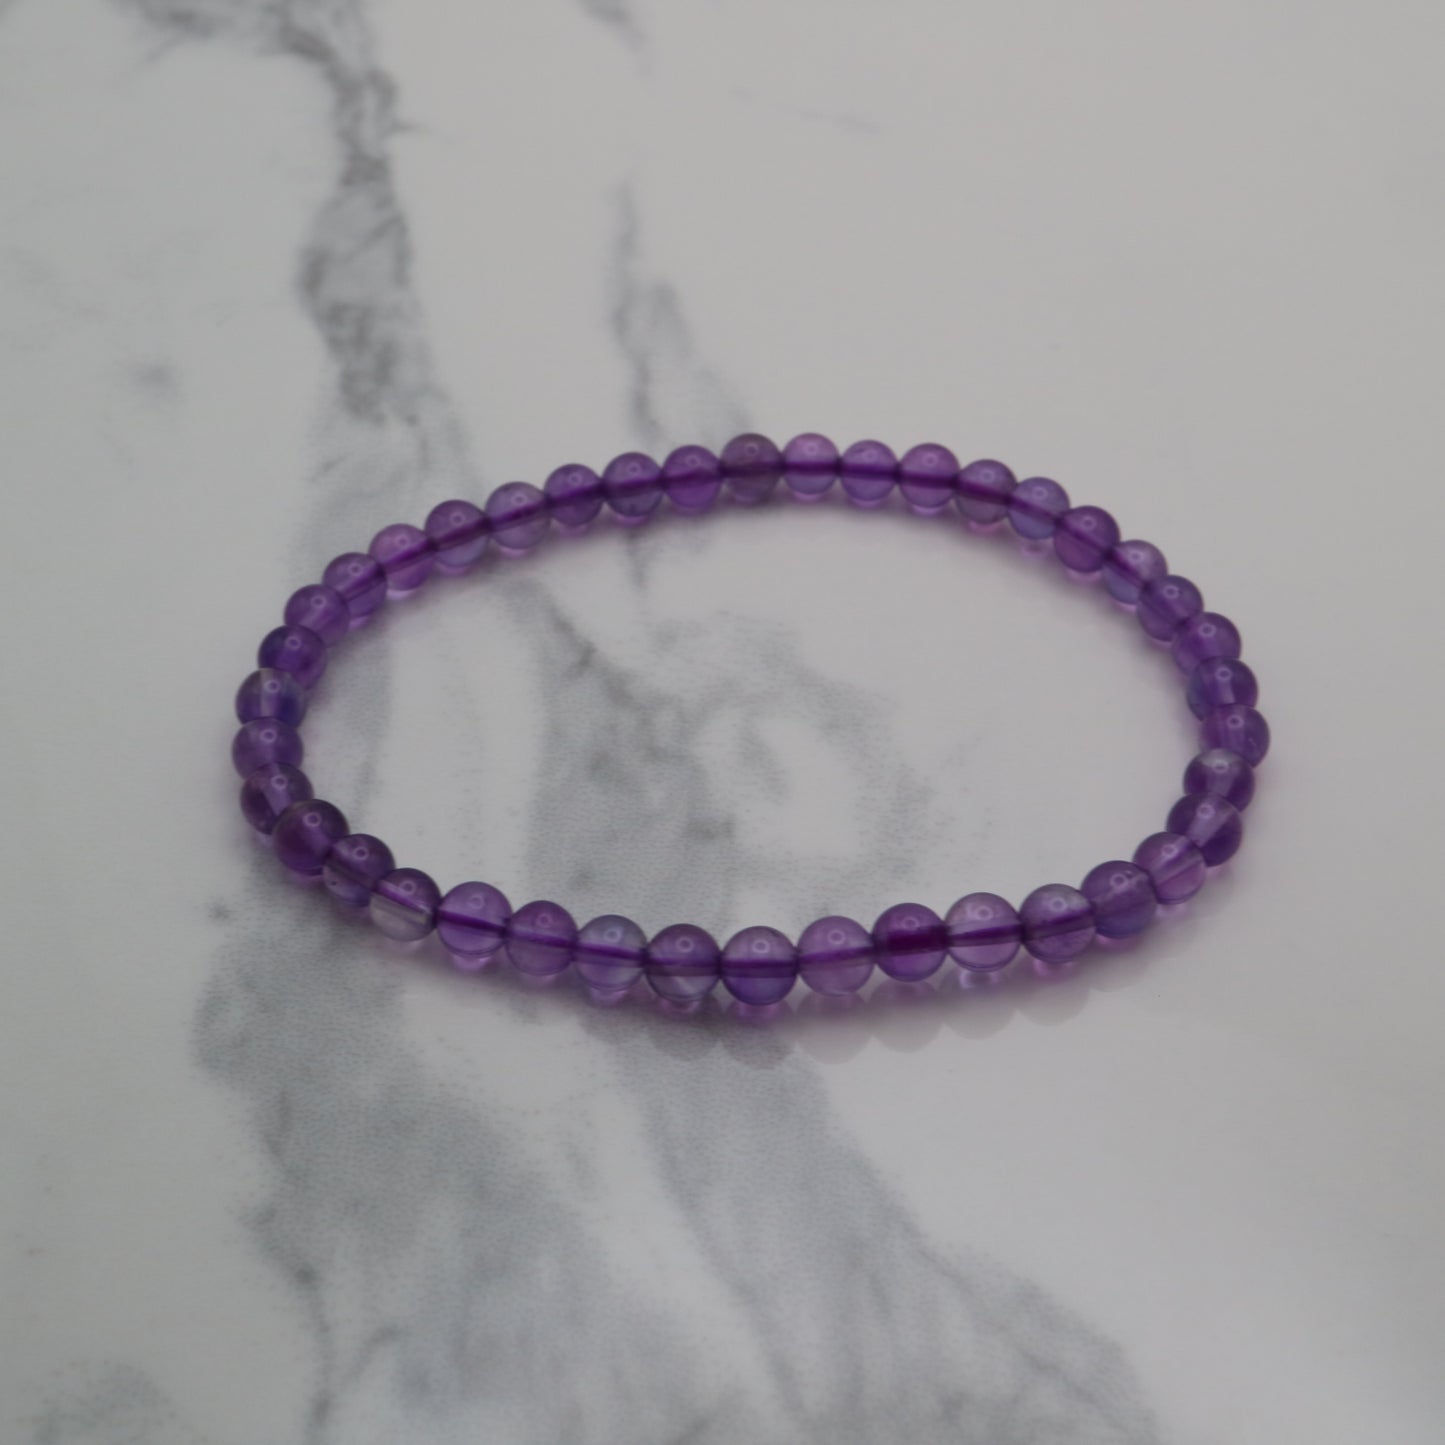 Amethyst crystal bead bracelet with 4mm size beads